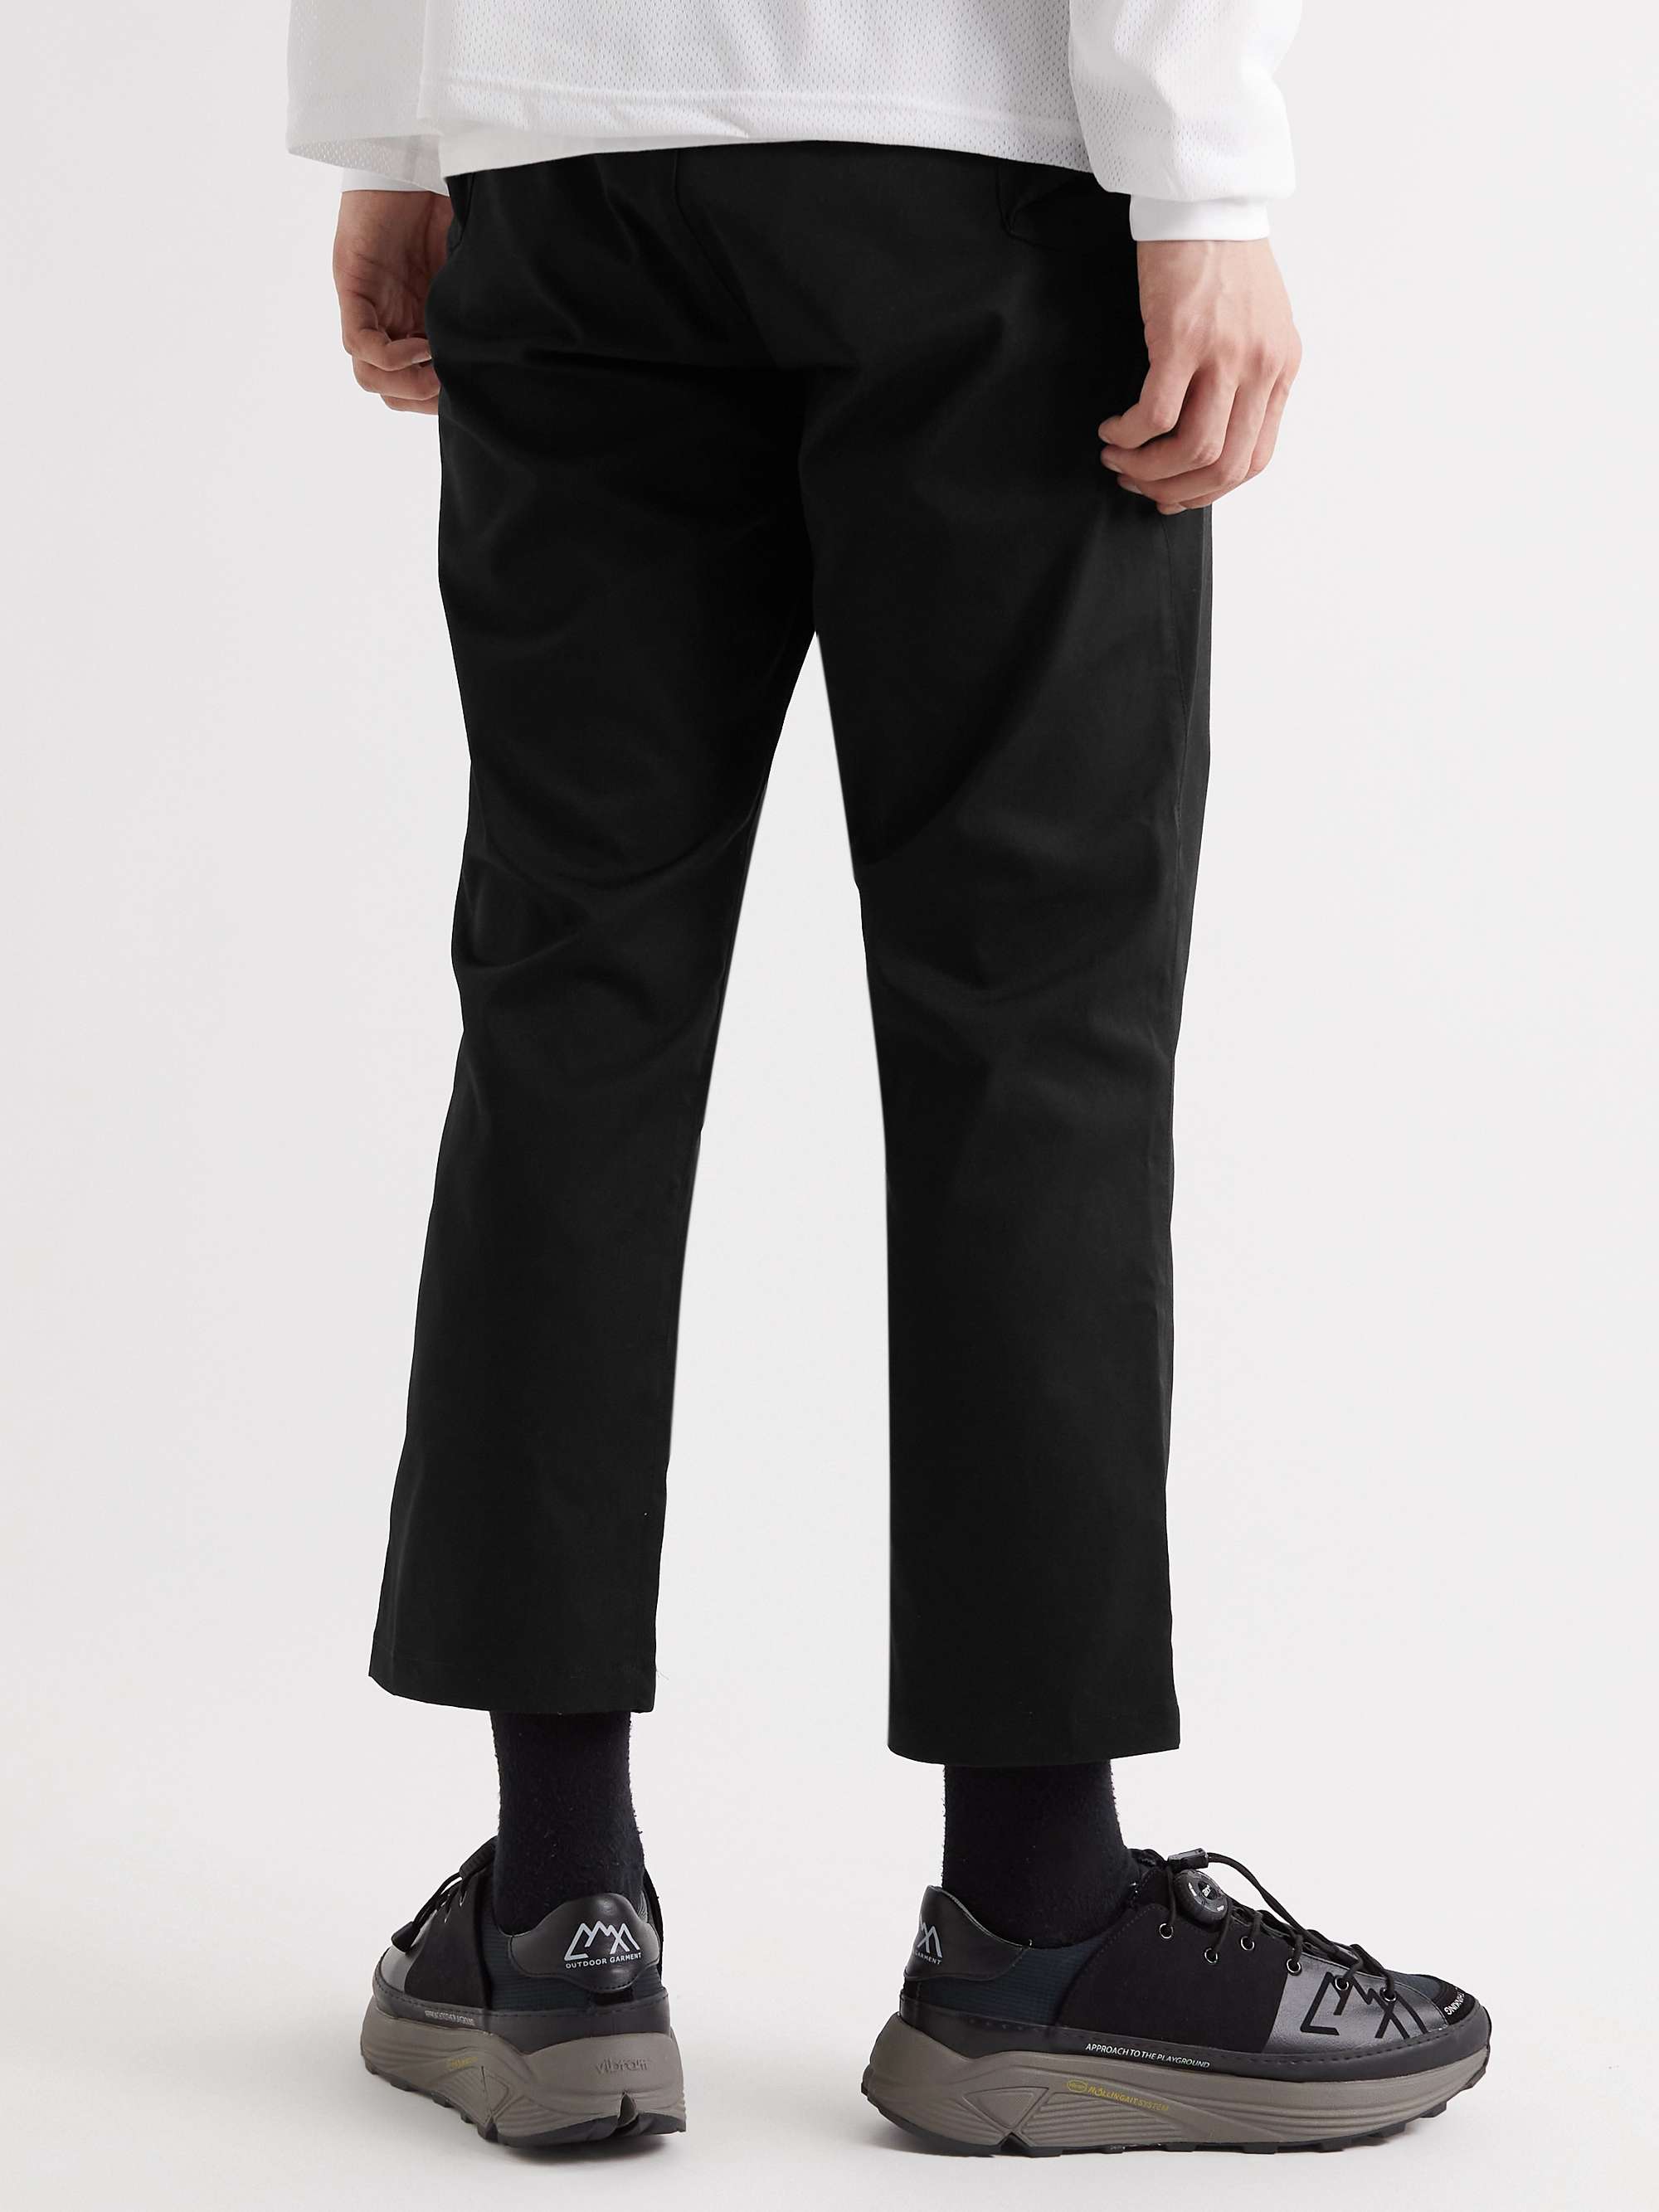 COMFY OUTDOOR GARMENT Step Back Webbing-Trimmed Shell Trousers